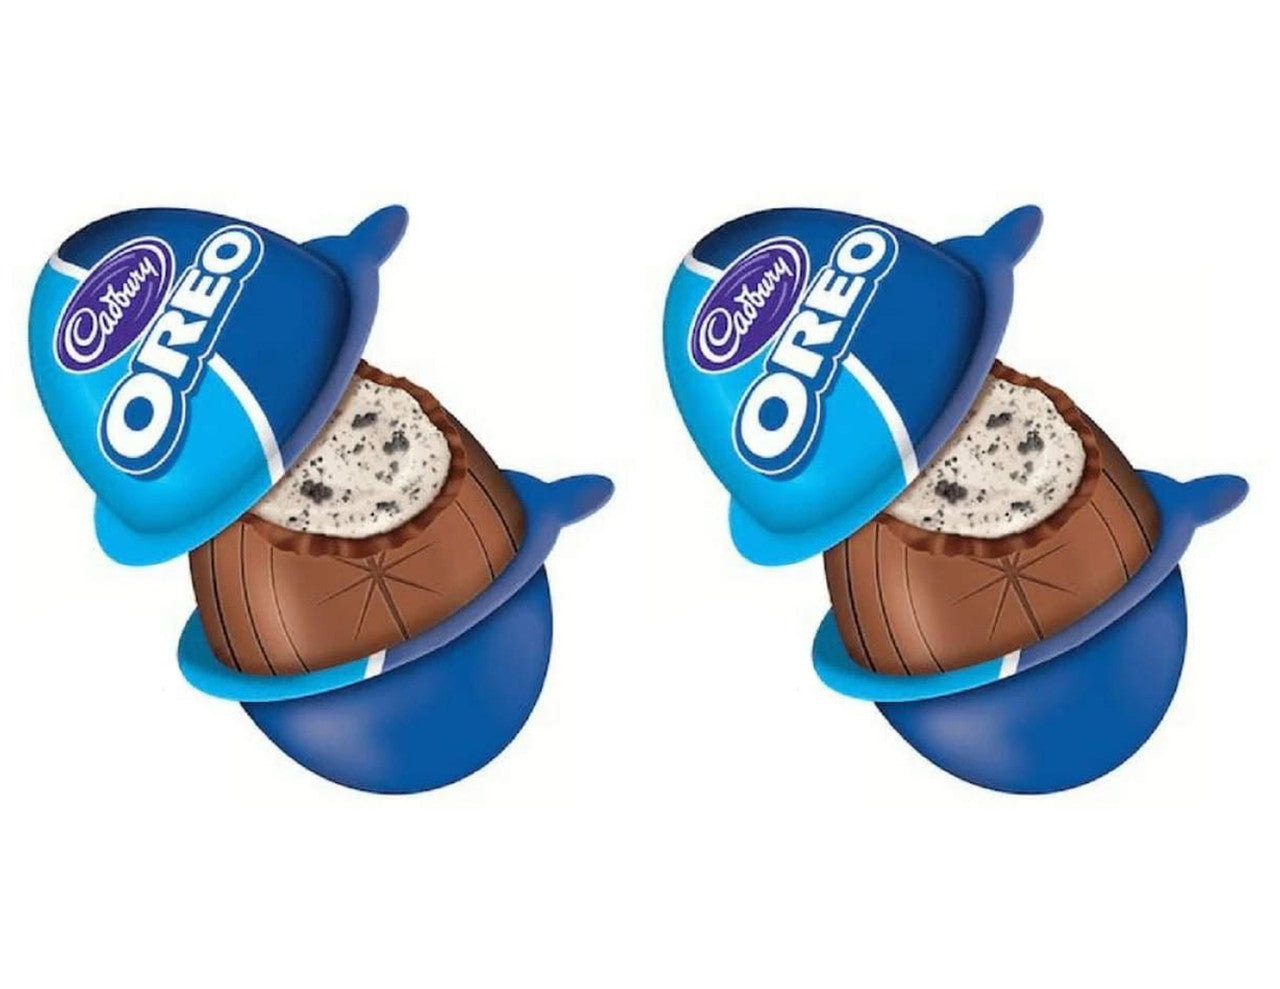 Oreo Easter Egg Chocolate with Creme Filling & Cookie Bits (2pk) {Canadian}